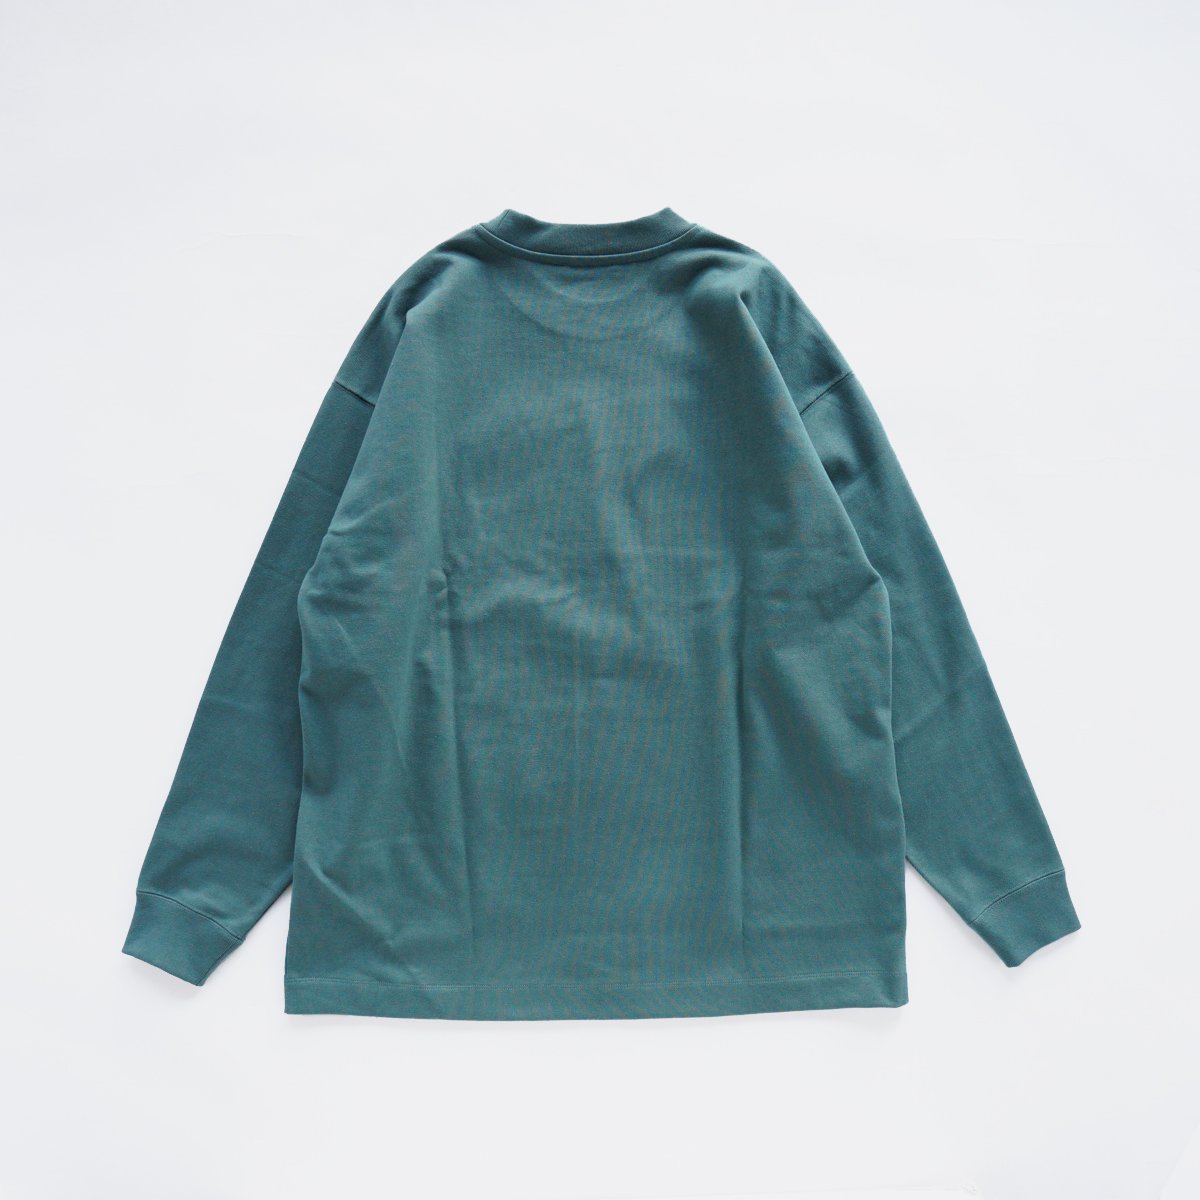 SUVIN AIR DOUBLE CREW NECK PULLOVER - 香川県高松市のセレクトショップ IHATOVE（イーハトーブ）  A.PRESSE,NEPENTHES,NICENESS,PORTER CLASSIC,WIRROWの通販